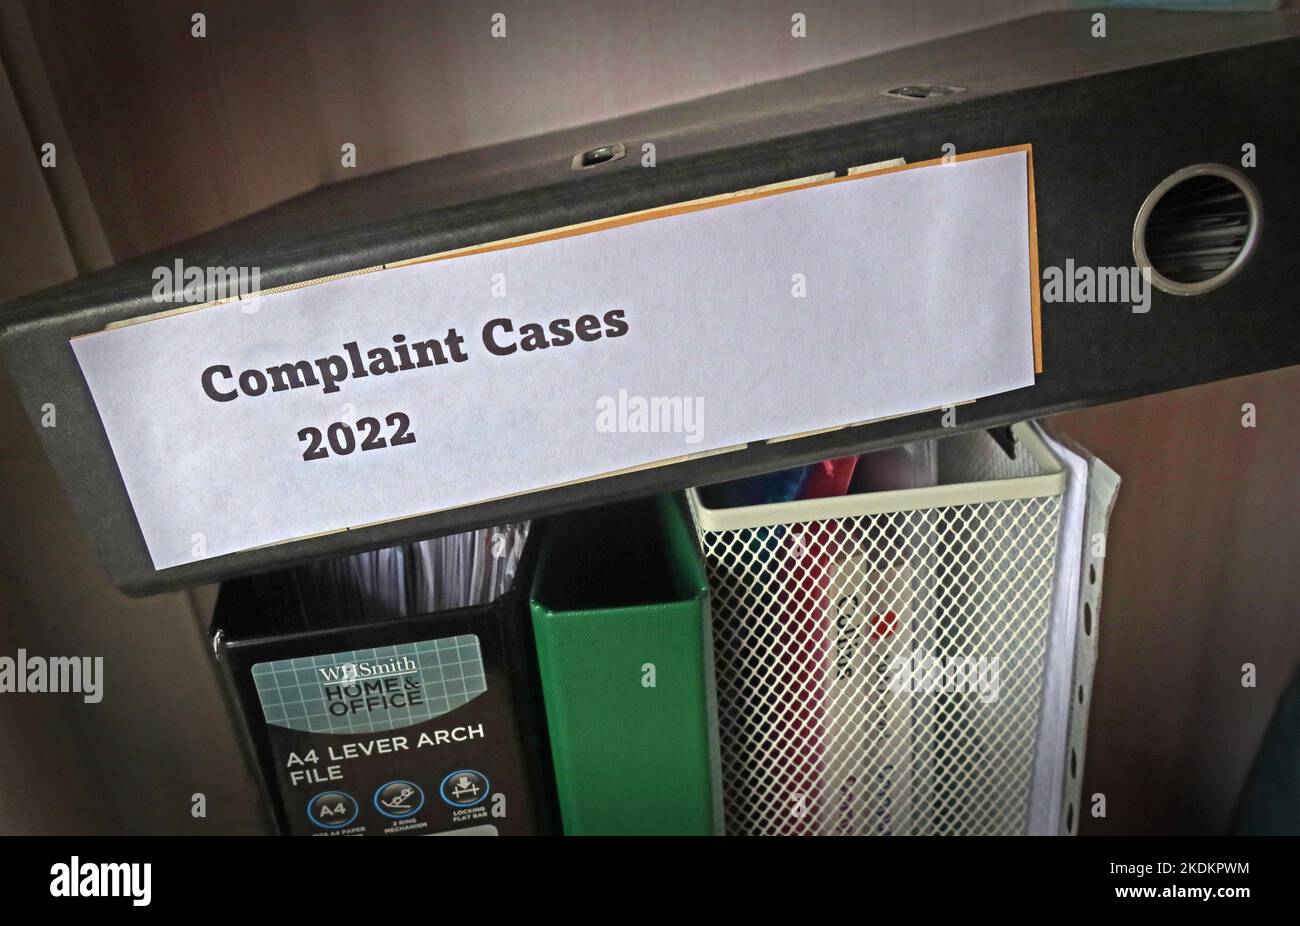 Complaint Cases 2022 lever arch file, containing separate issues and cases, in an office environment Stock Photo